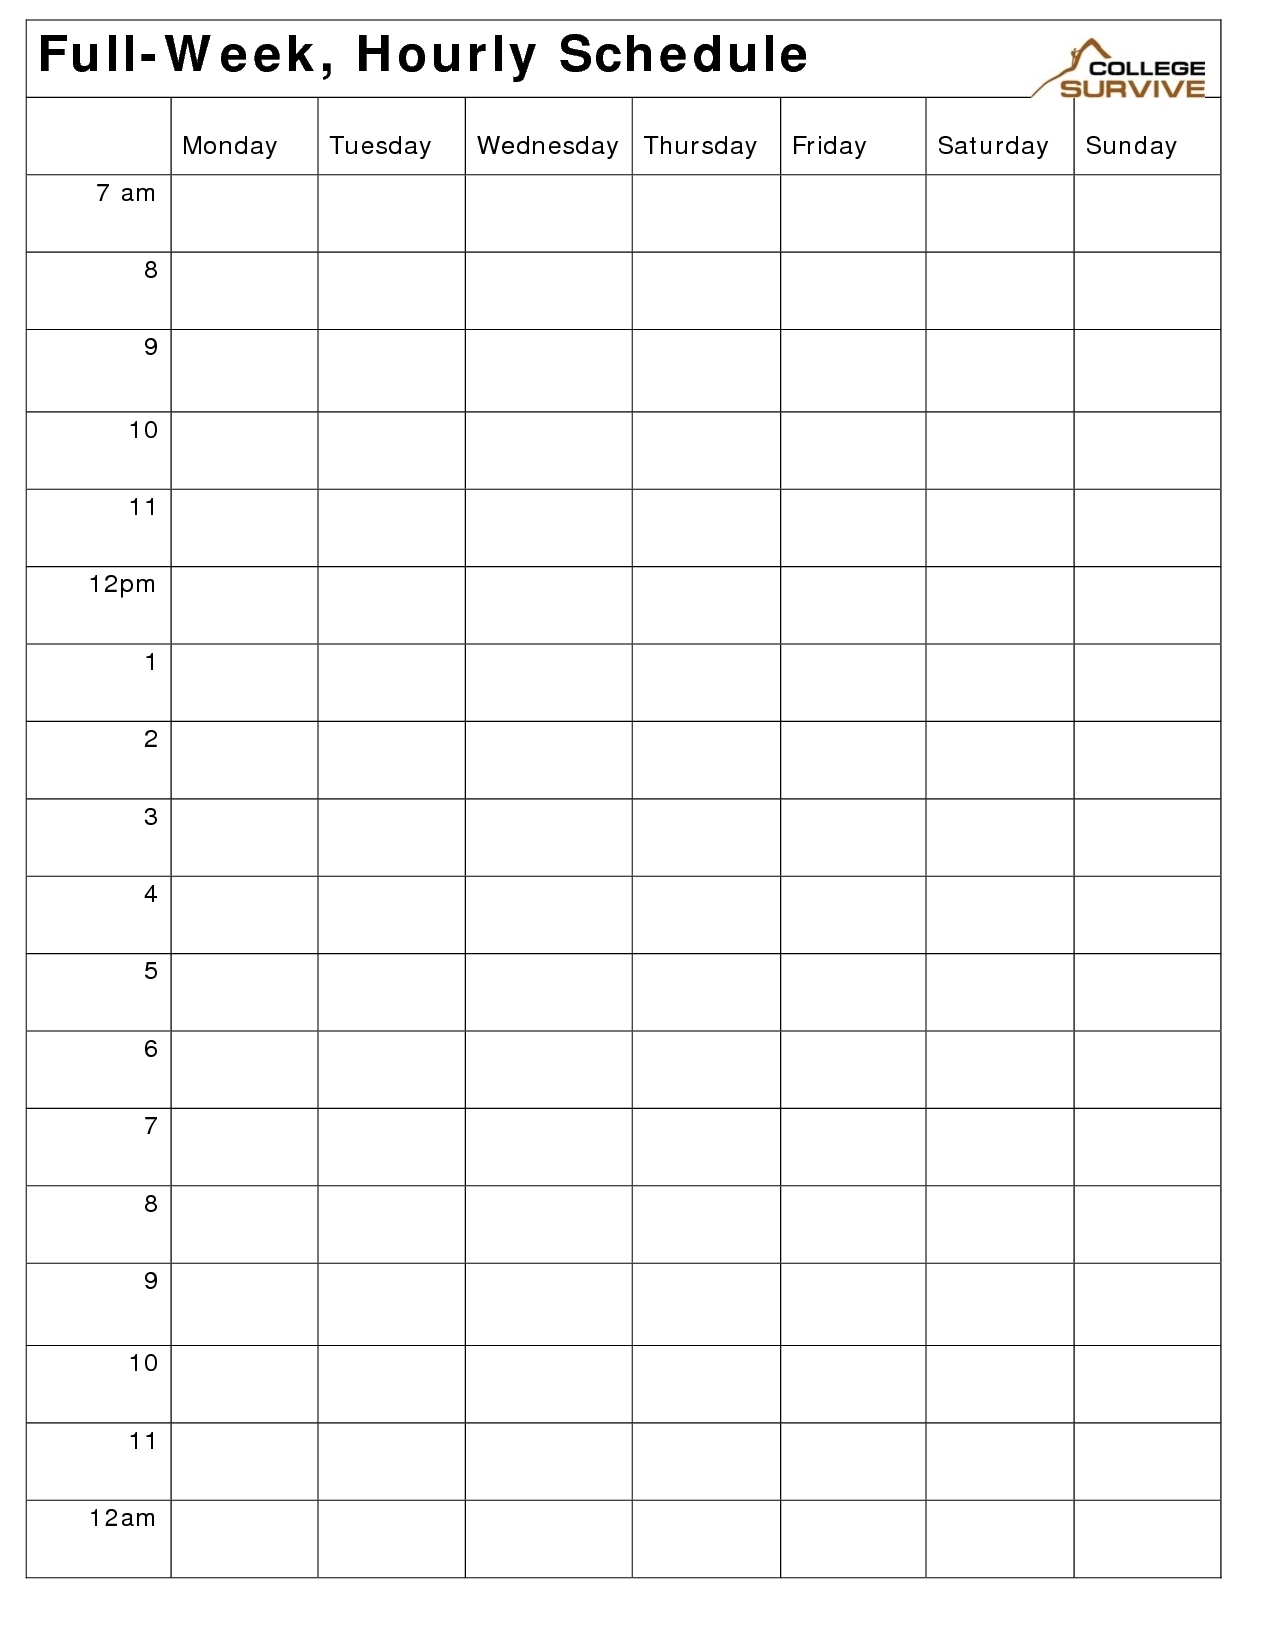 Blank Calendar 5 Day Week With Times | Template Calendar Printable with 5 Day Week Blank Calendar With Time Slots Printable